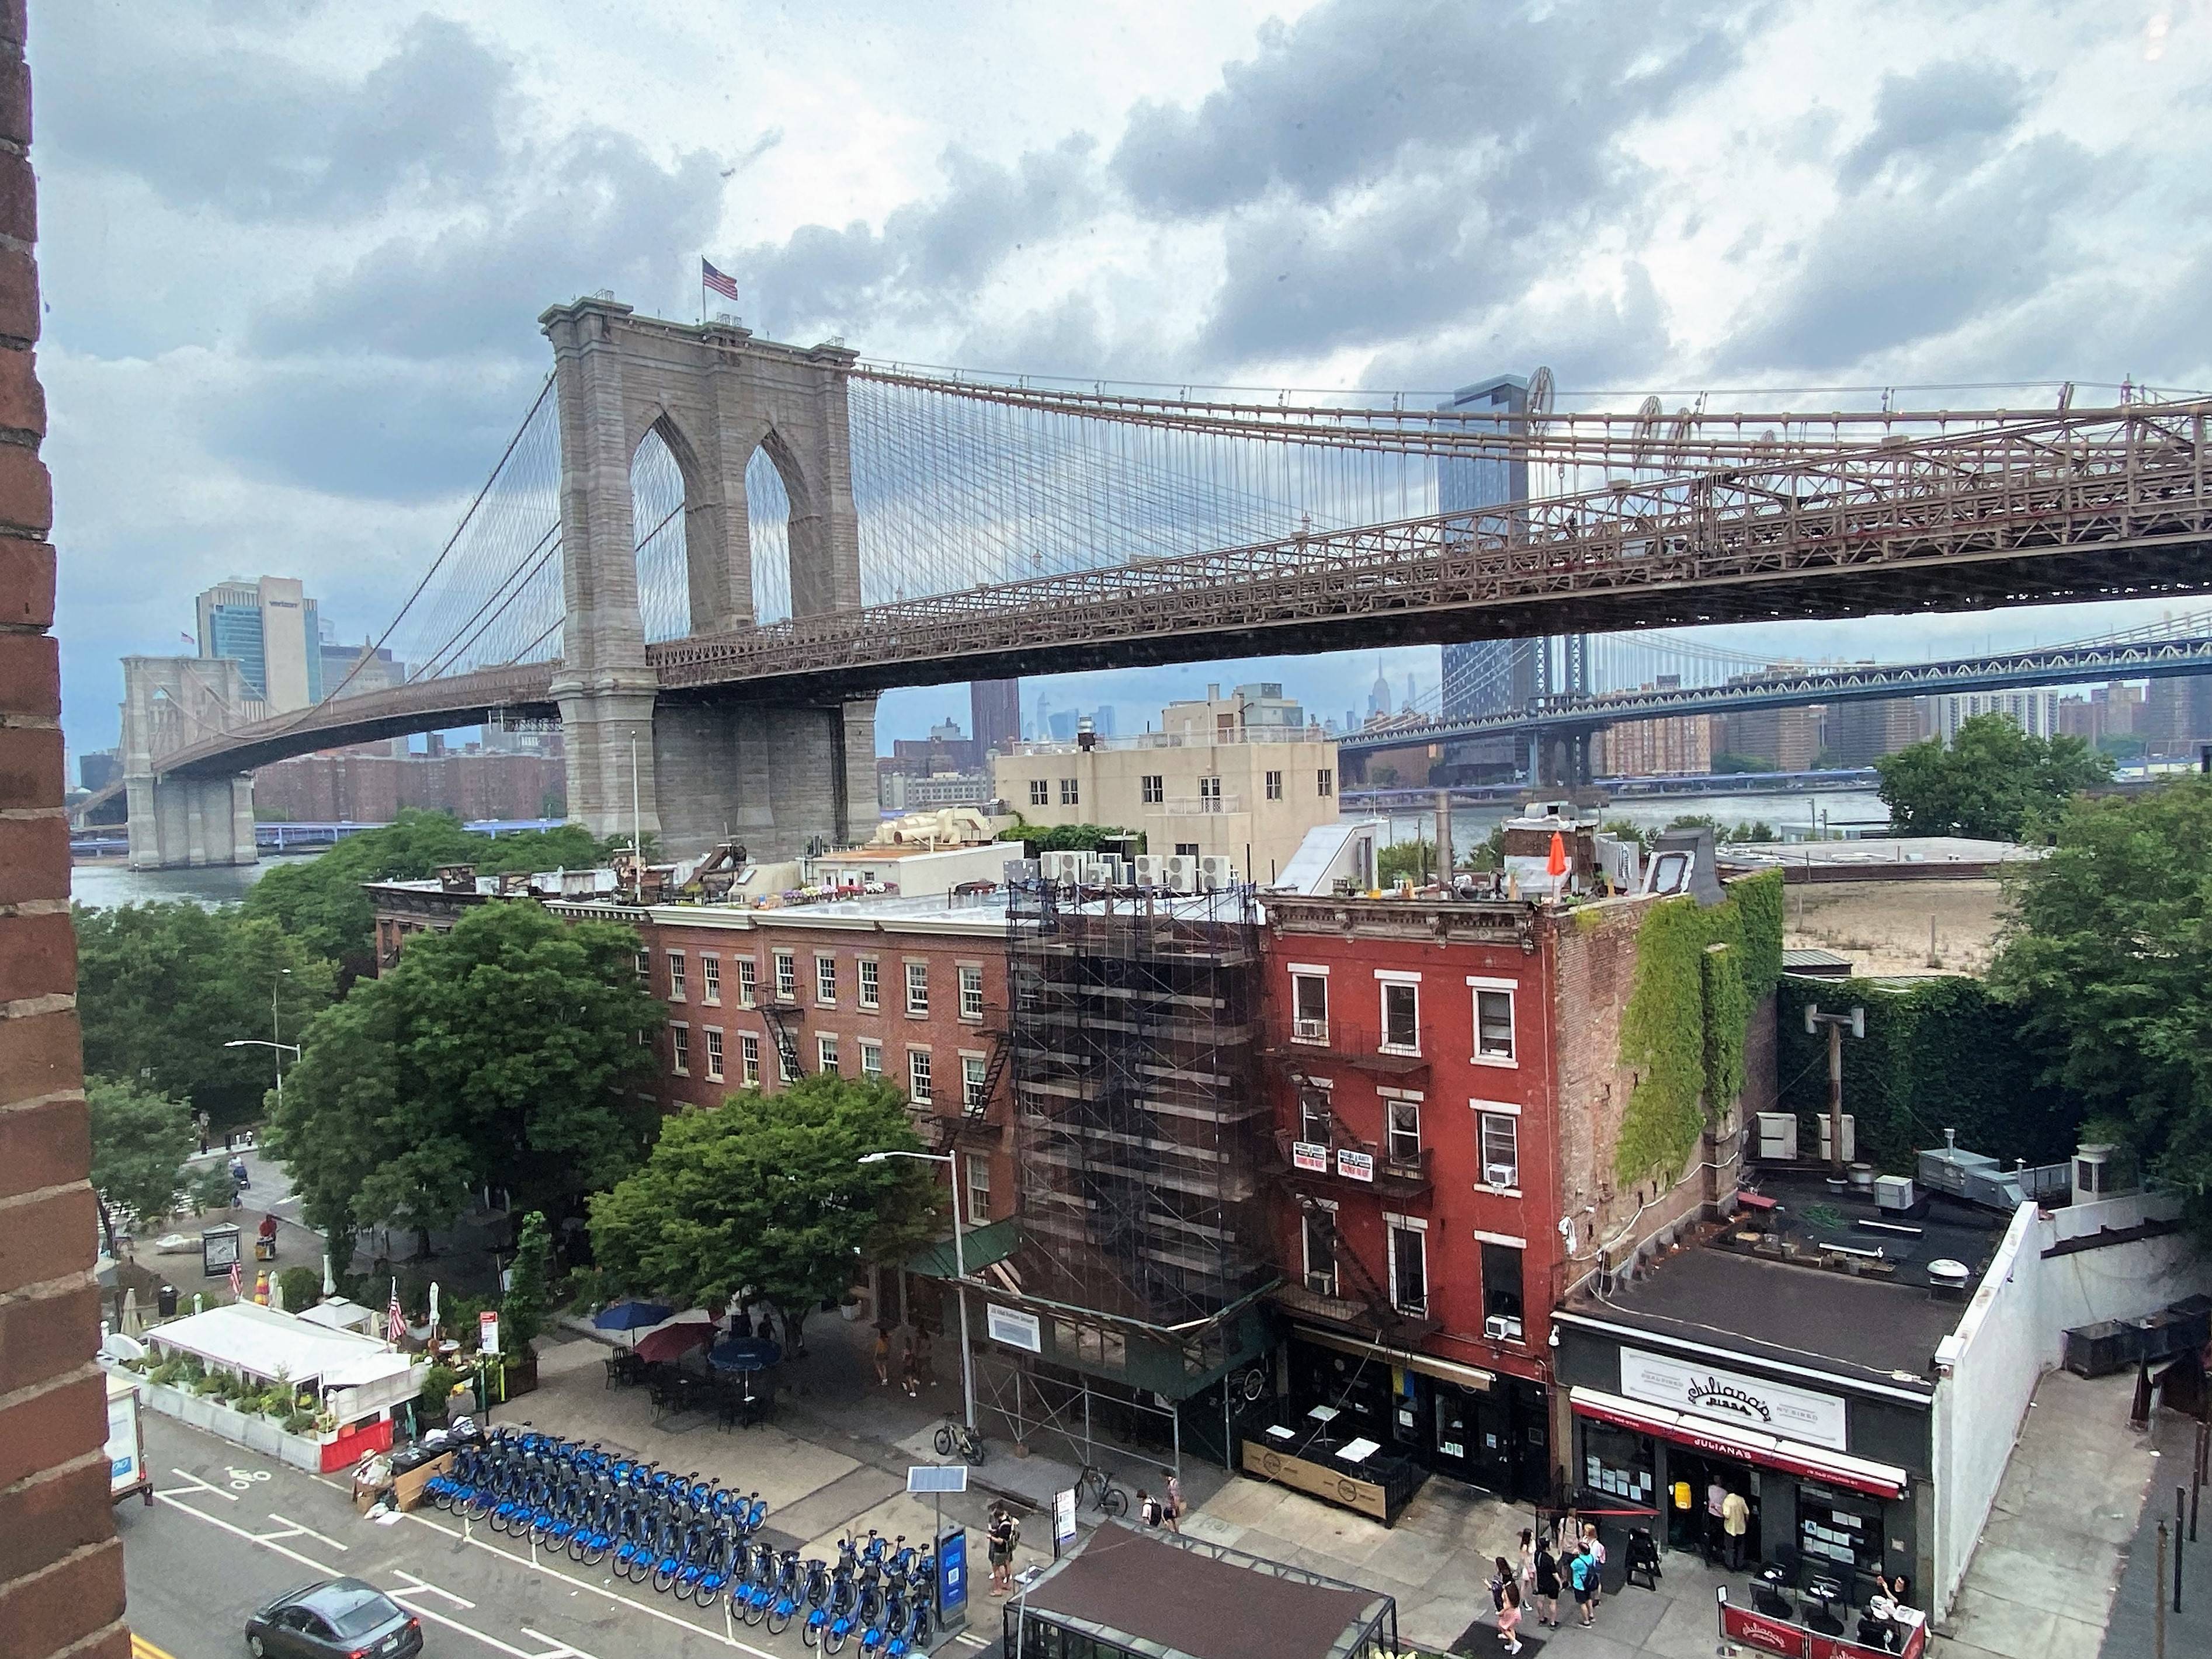 Steps away from Brooklyn Bridge Park, a visit to this truly unique loft home in DUMBO starts with a walk across the 5th floor private bridge across the building's open ...